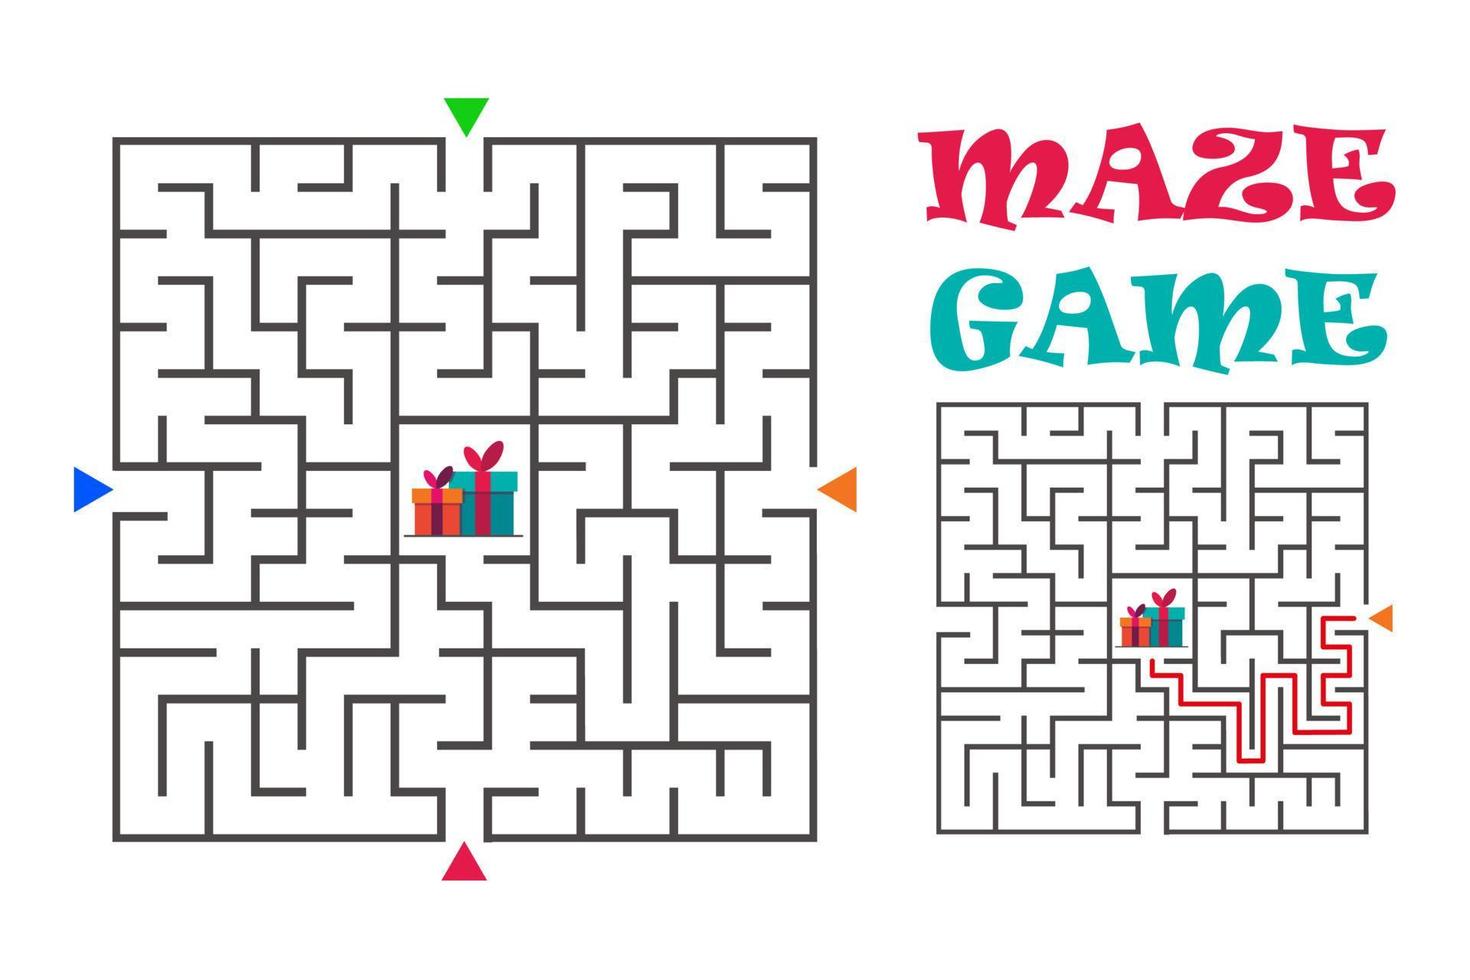 Square maze labyrinth game for kids. Labyrinth logic conundrum. Four entrance and one right way to go. Vector flat illustration